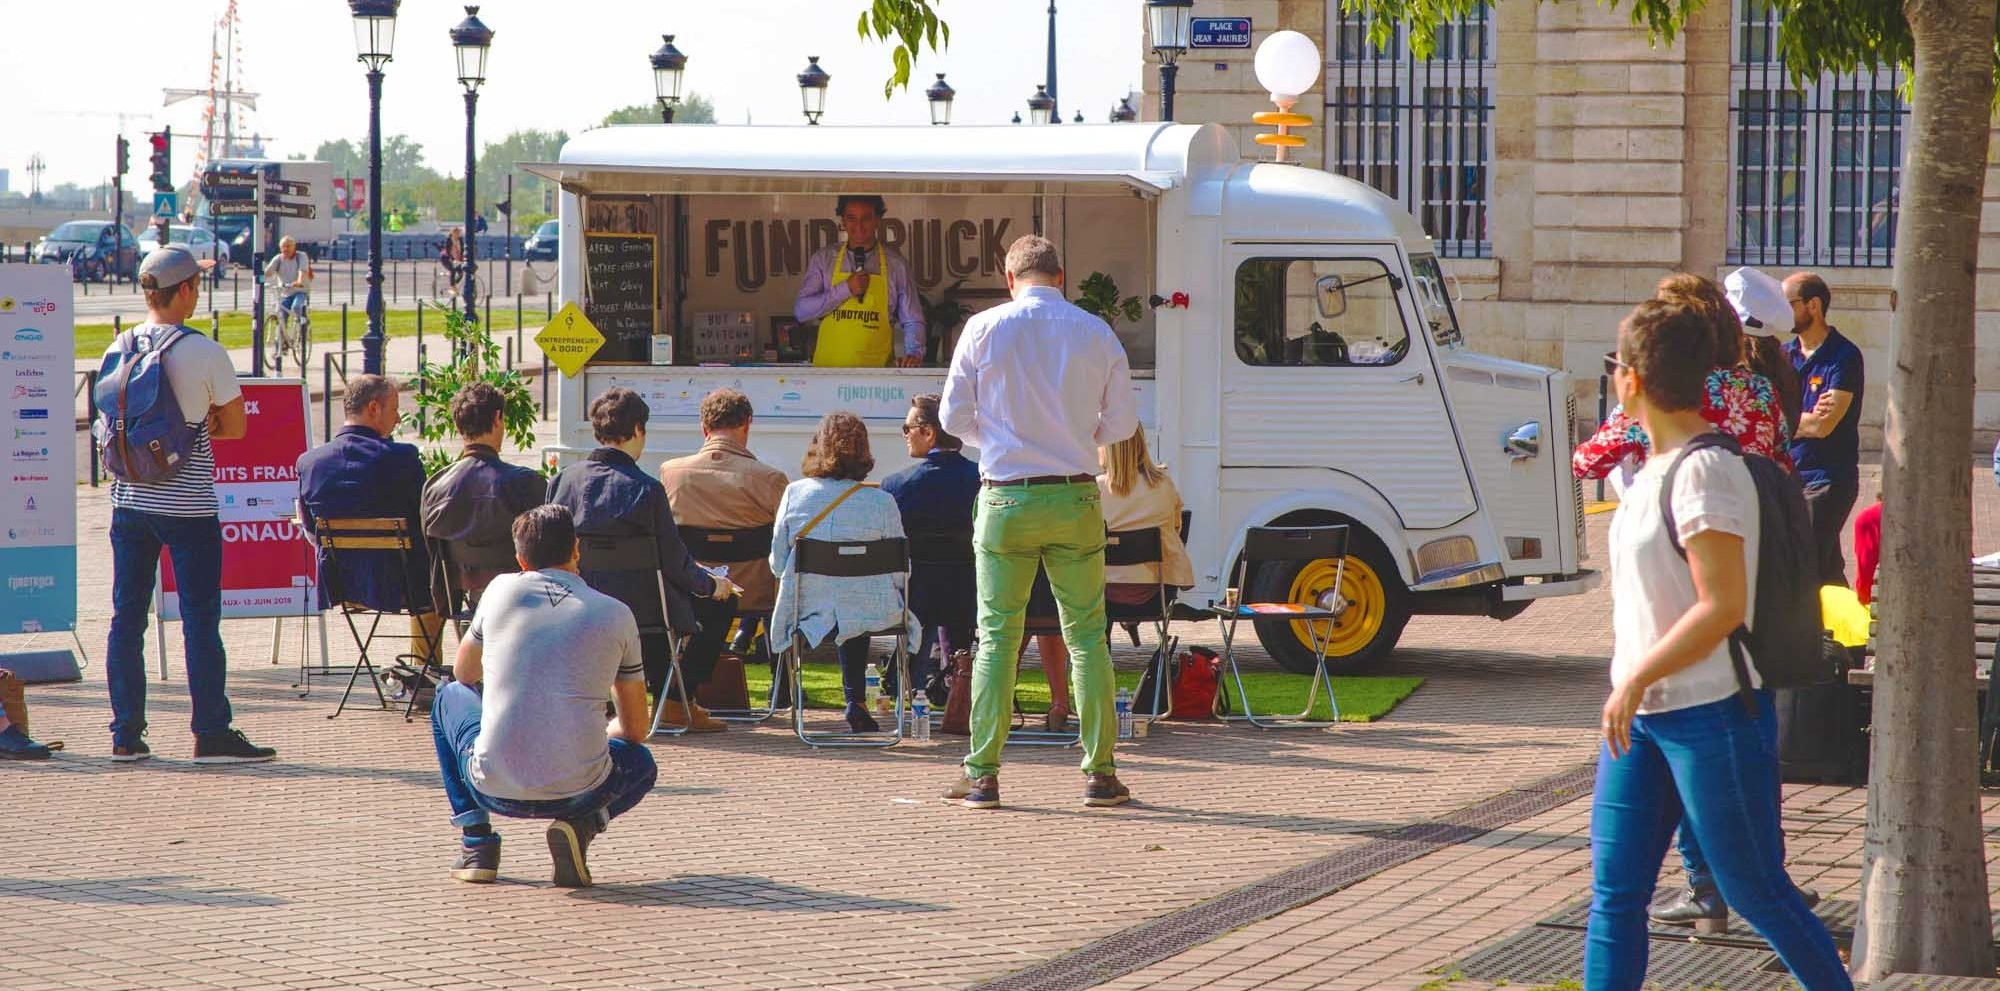 The Fundtruck contest: Obtain visibility and funds for your startup